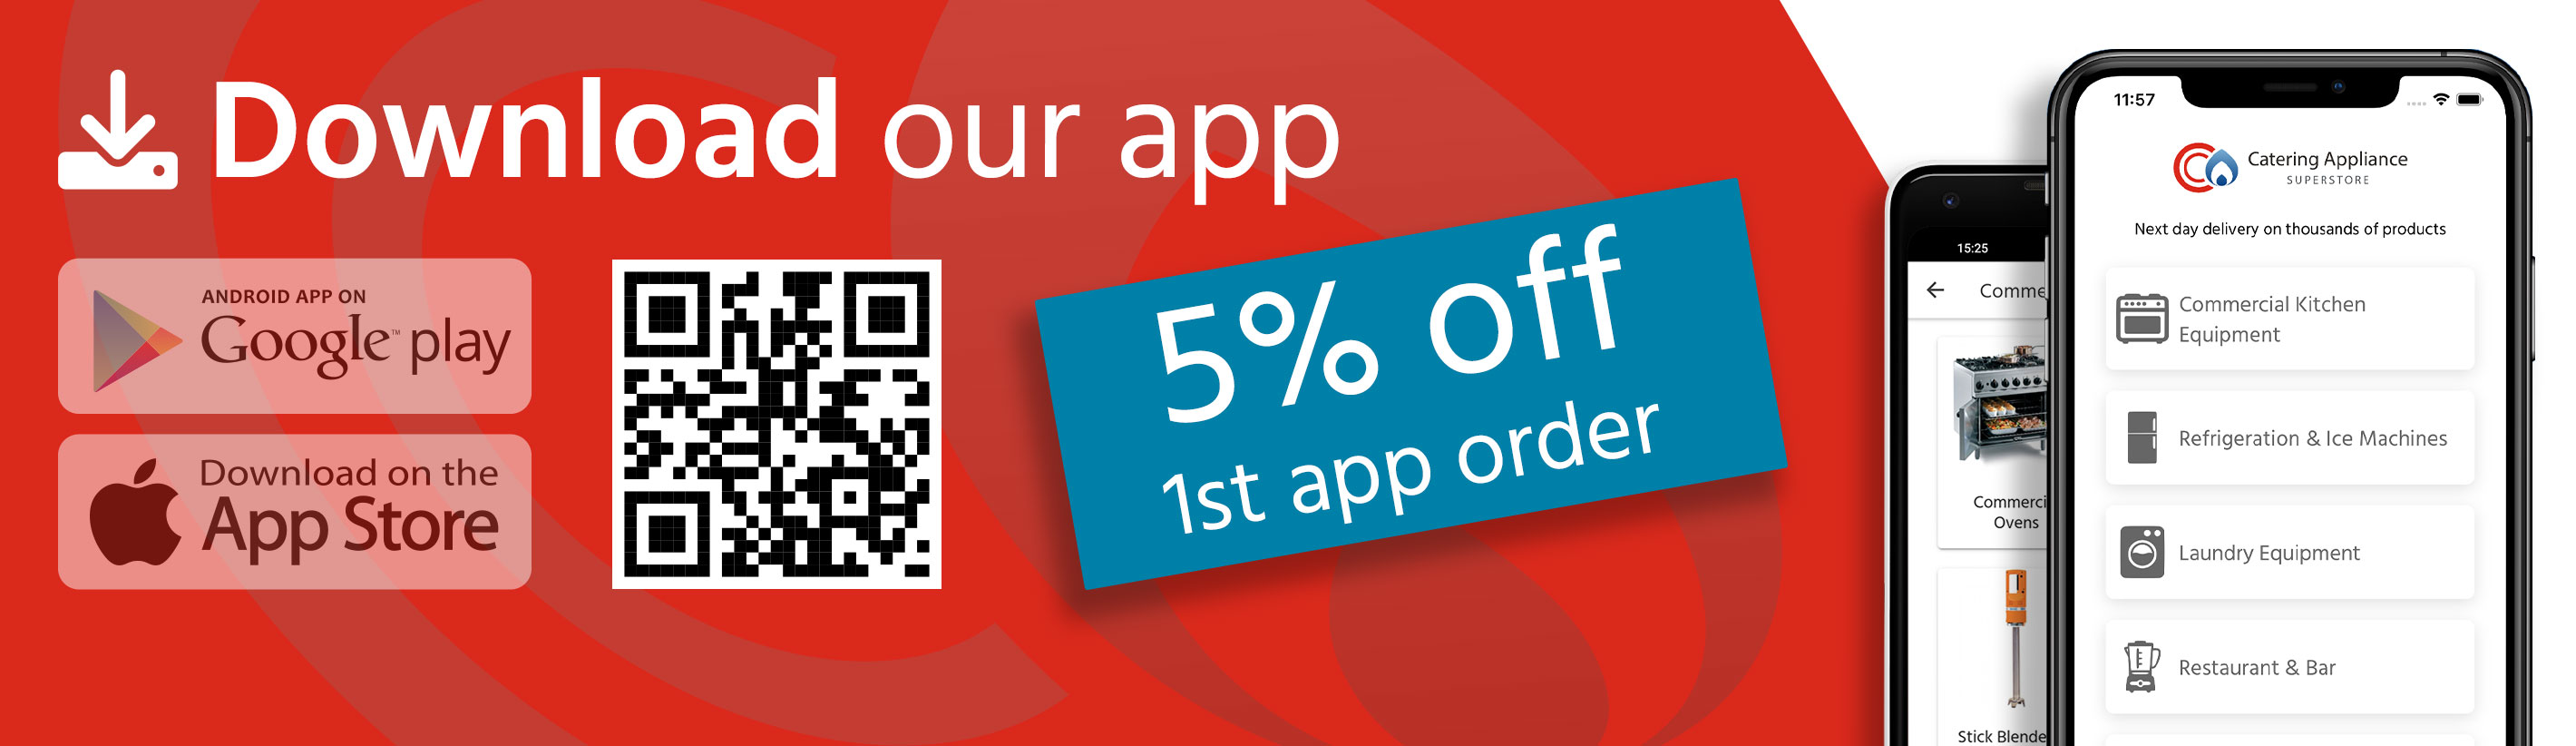 Download the app and get 5% off your first app order